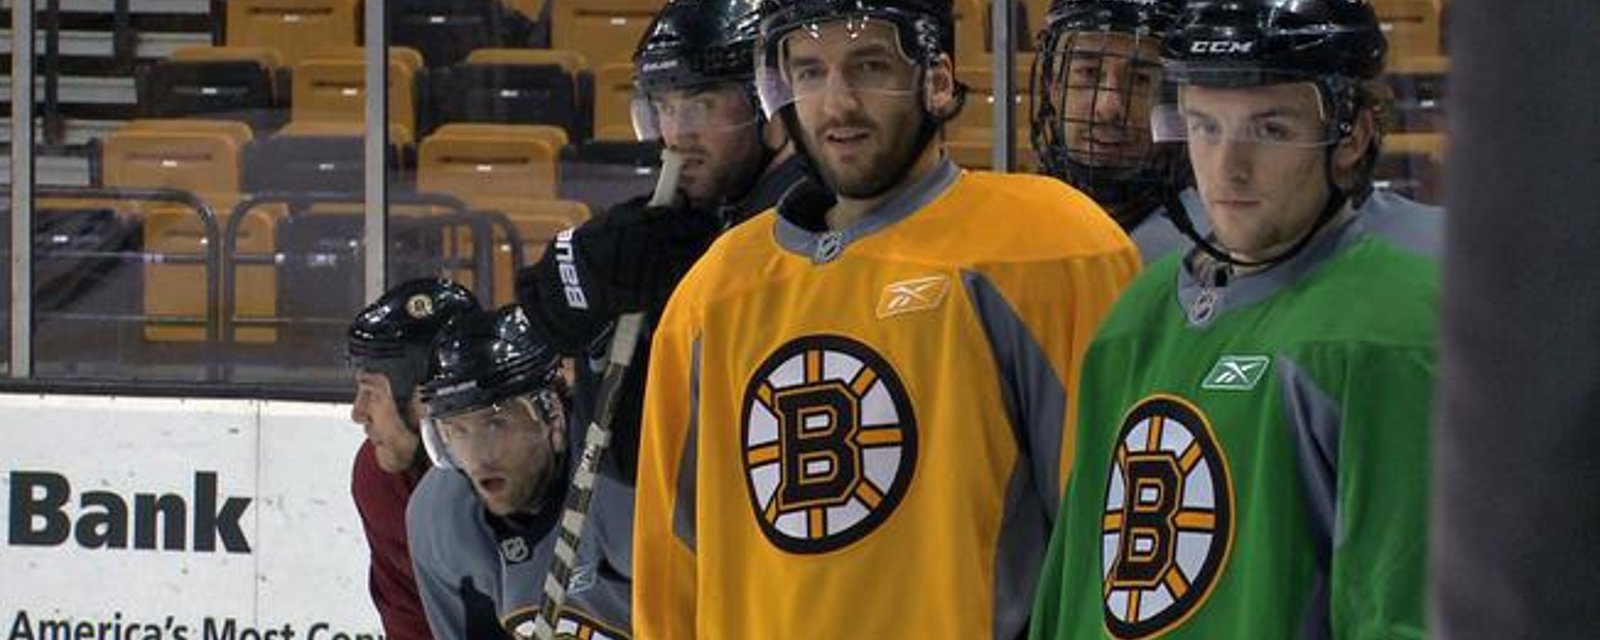 Boston Bruins announce training camp roster and schedule